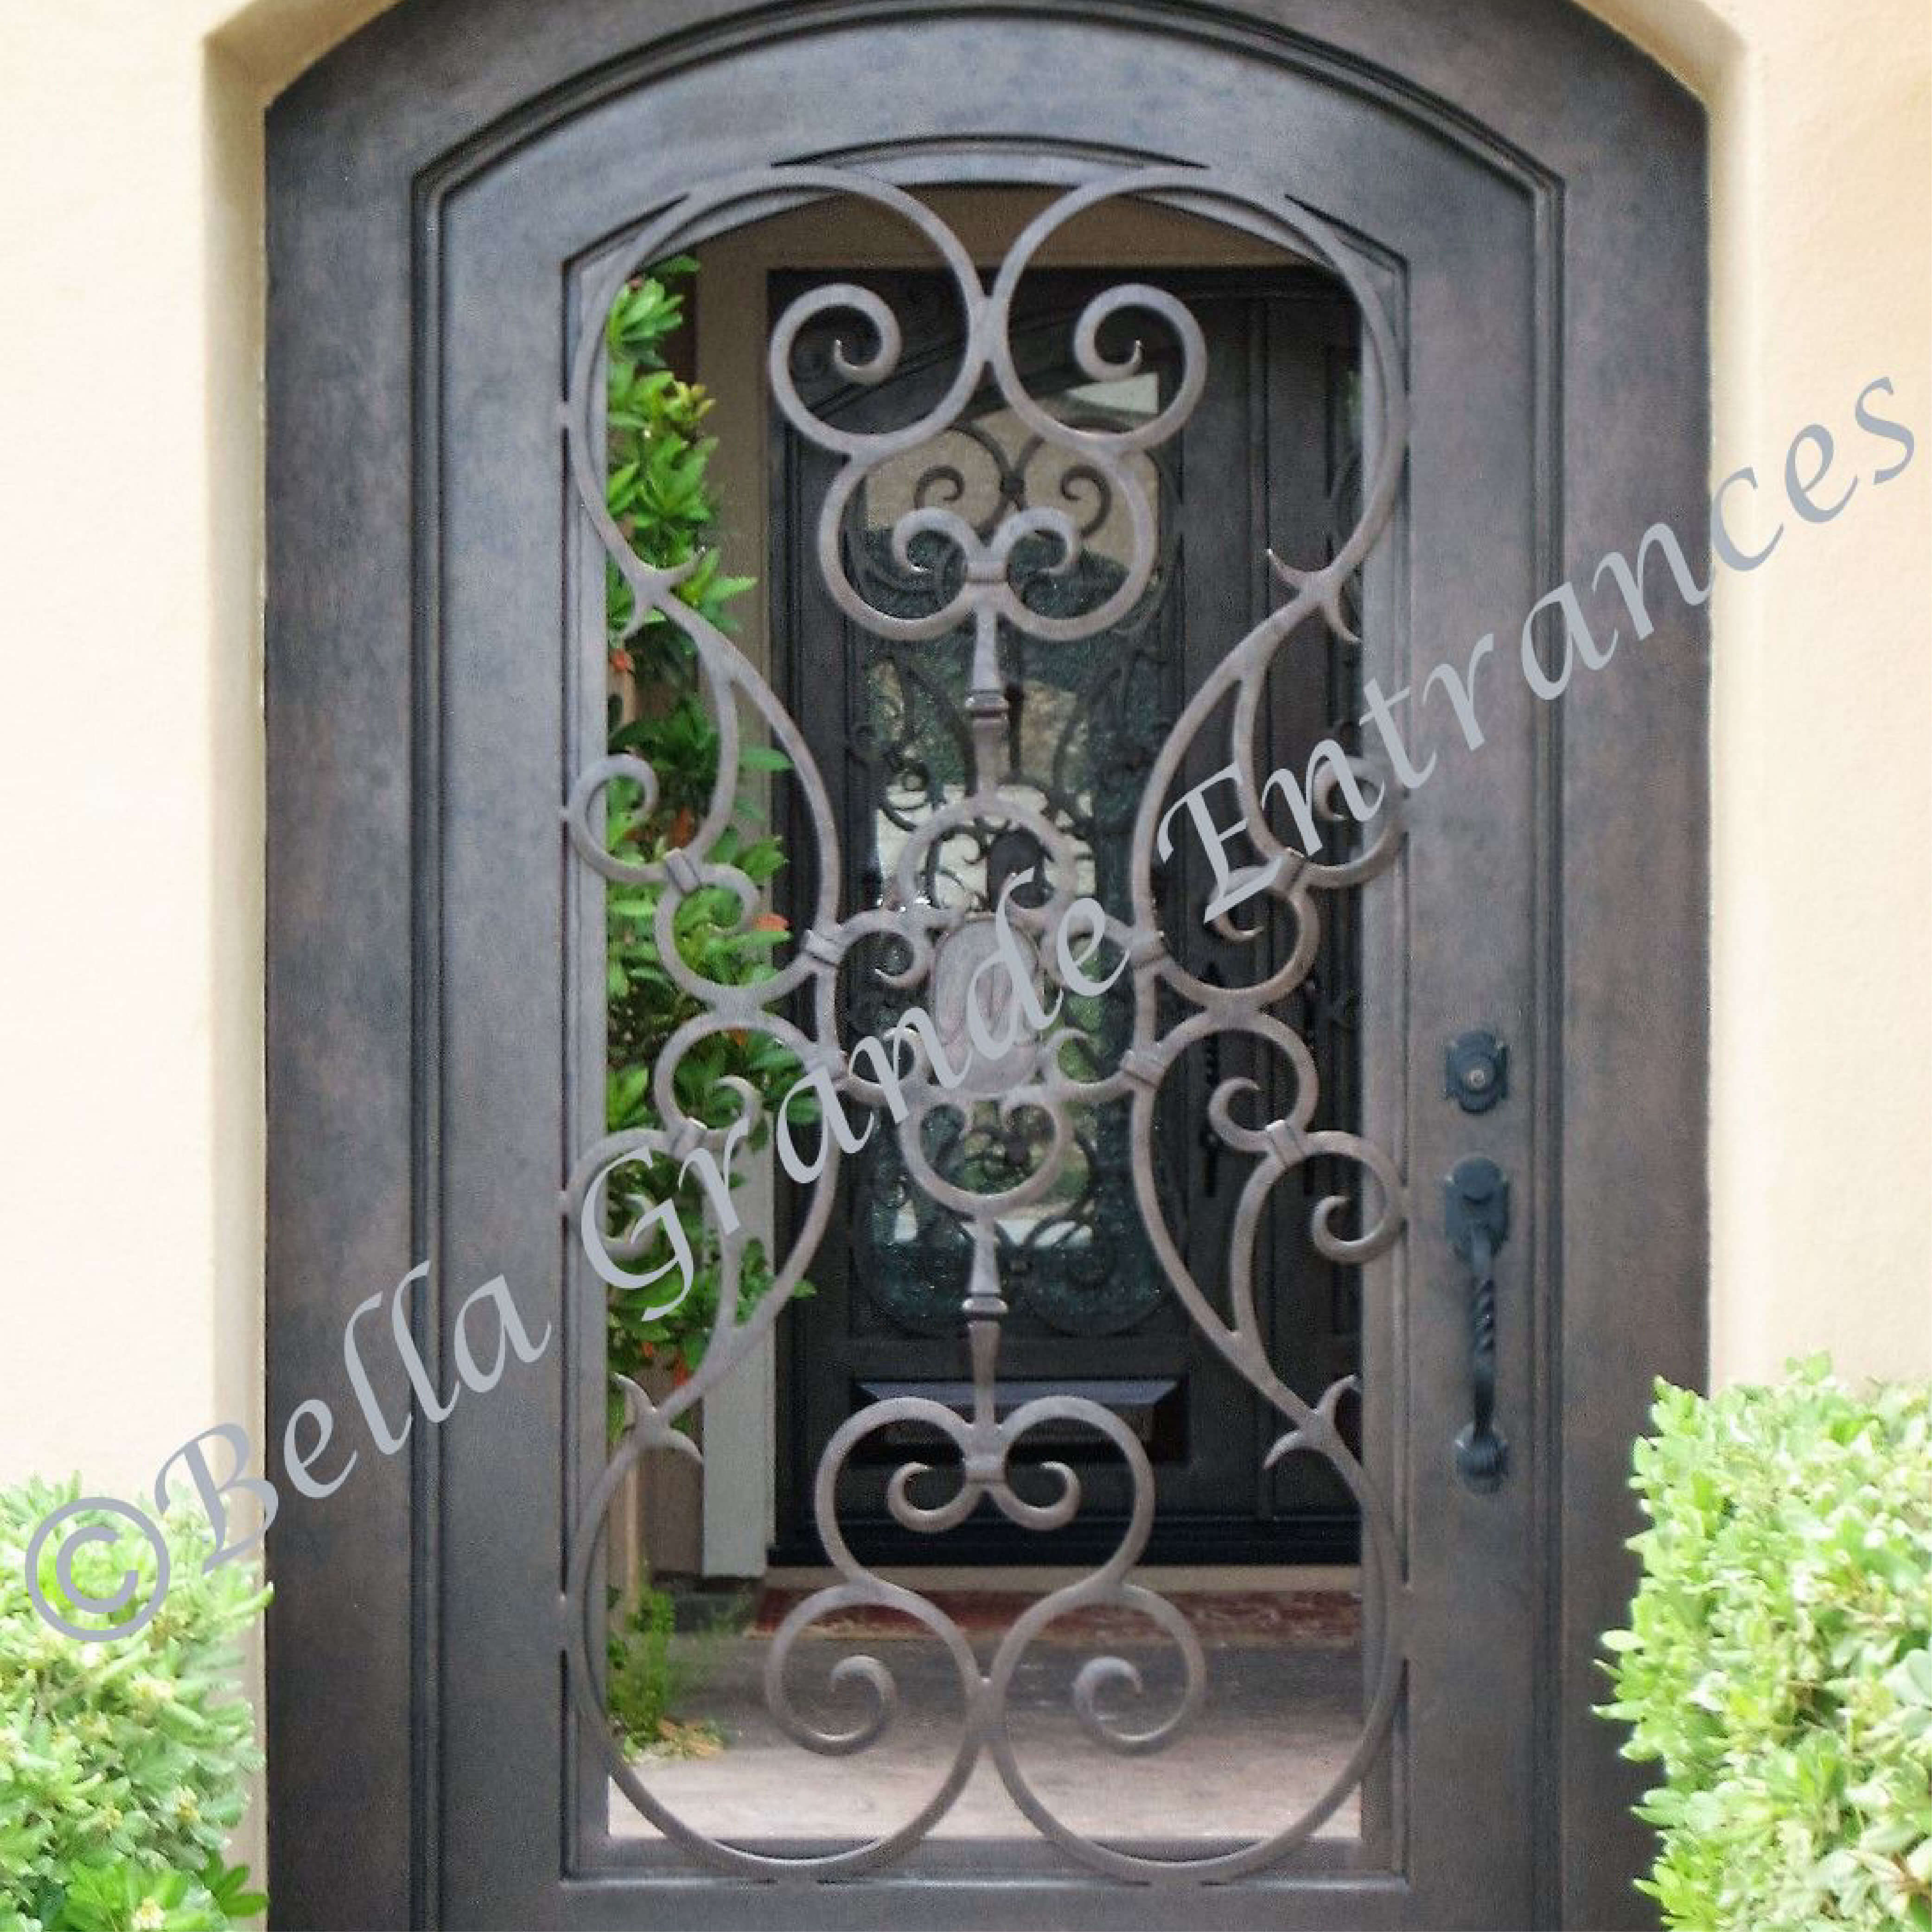 After installing the Bella Grande Entrances Iron Gate Model 212M door, take a look at the image.